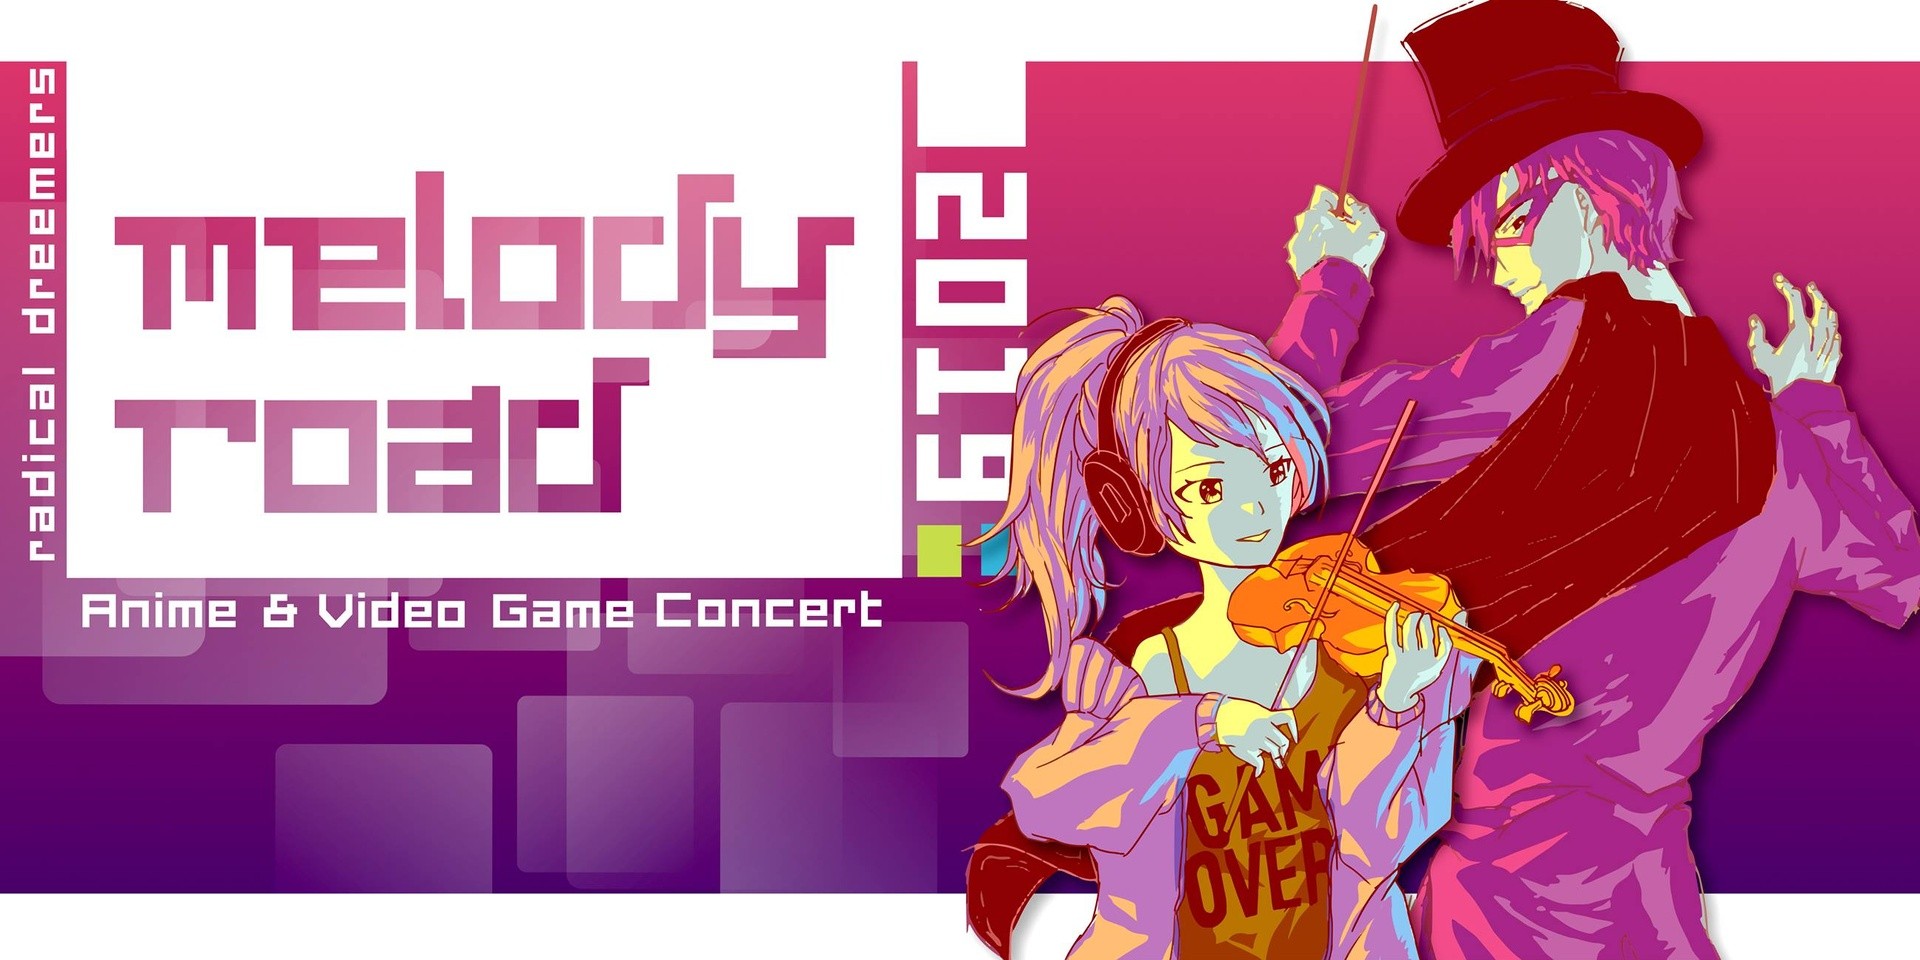 Celebrate the holidays with your favorite anime and video game soundtracks at Melody Road 2019